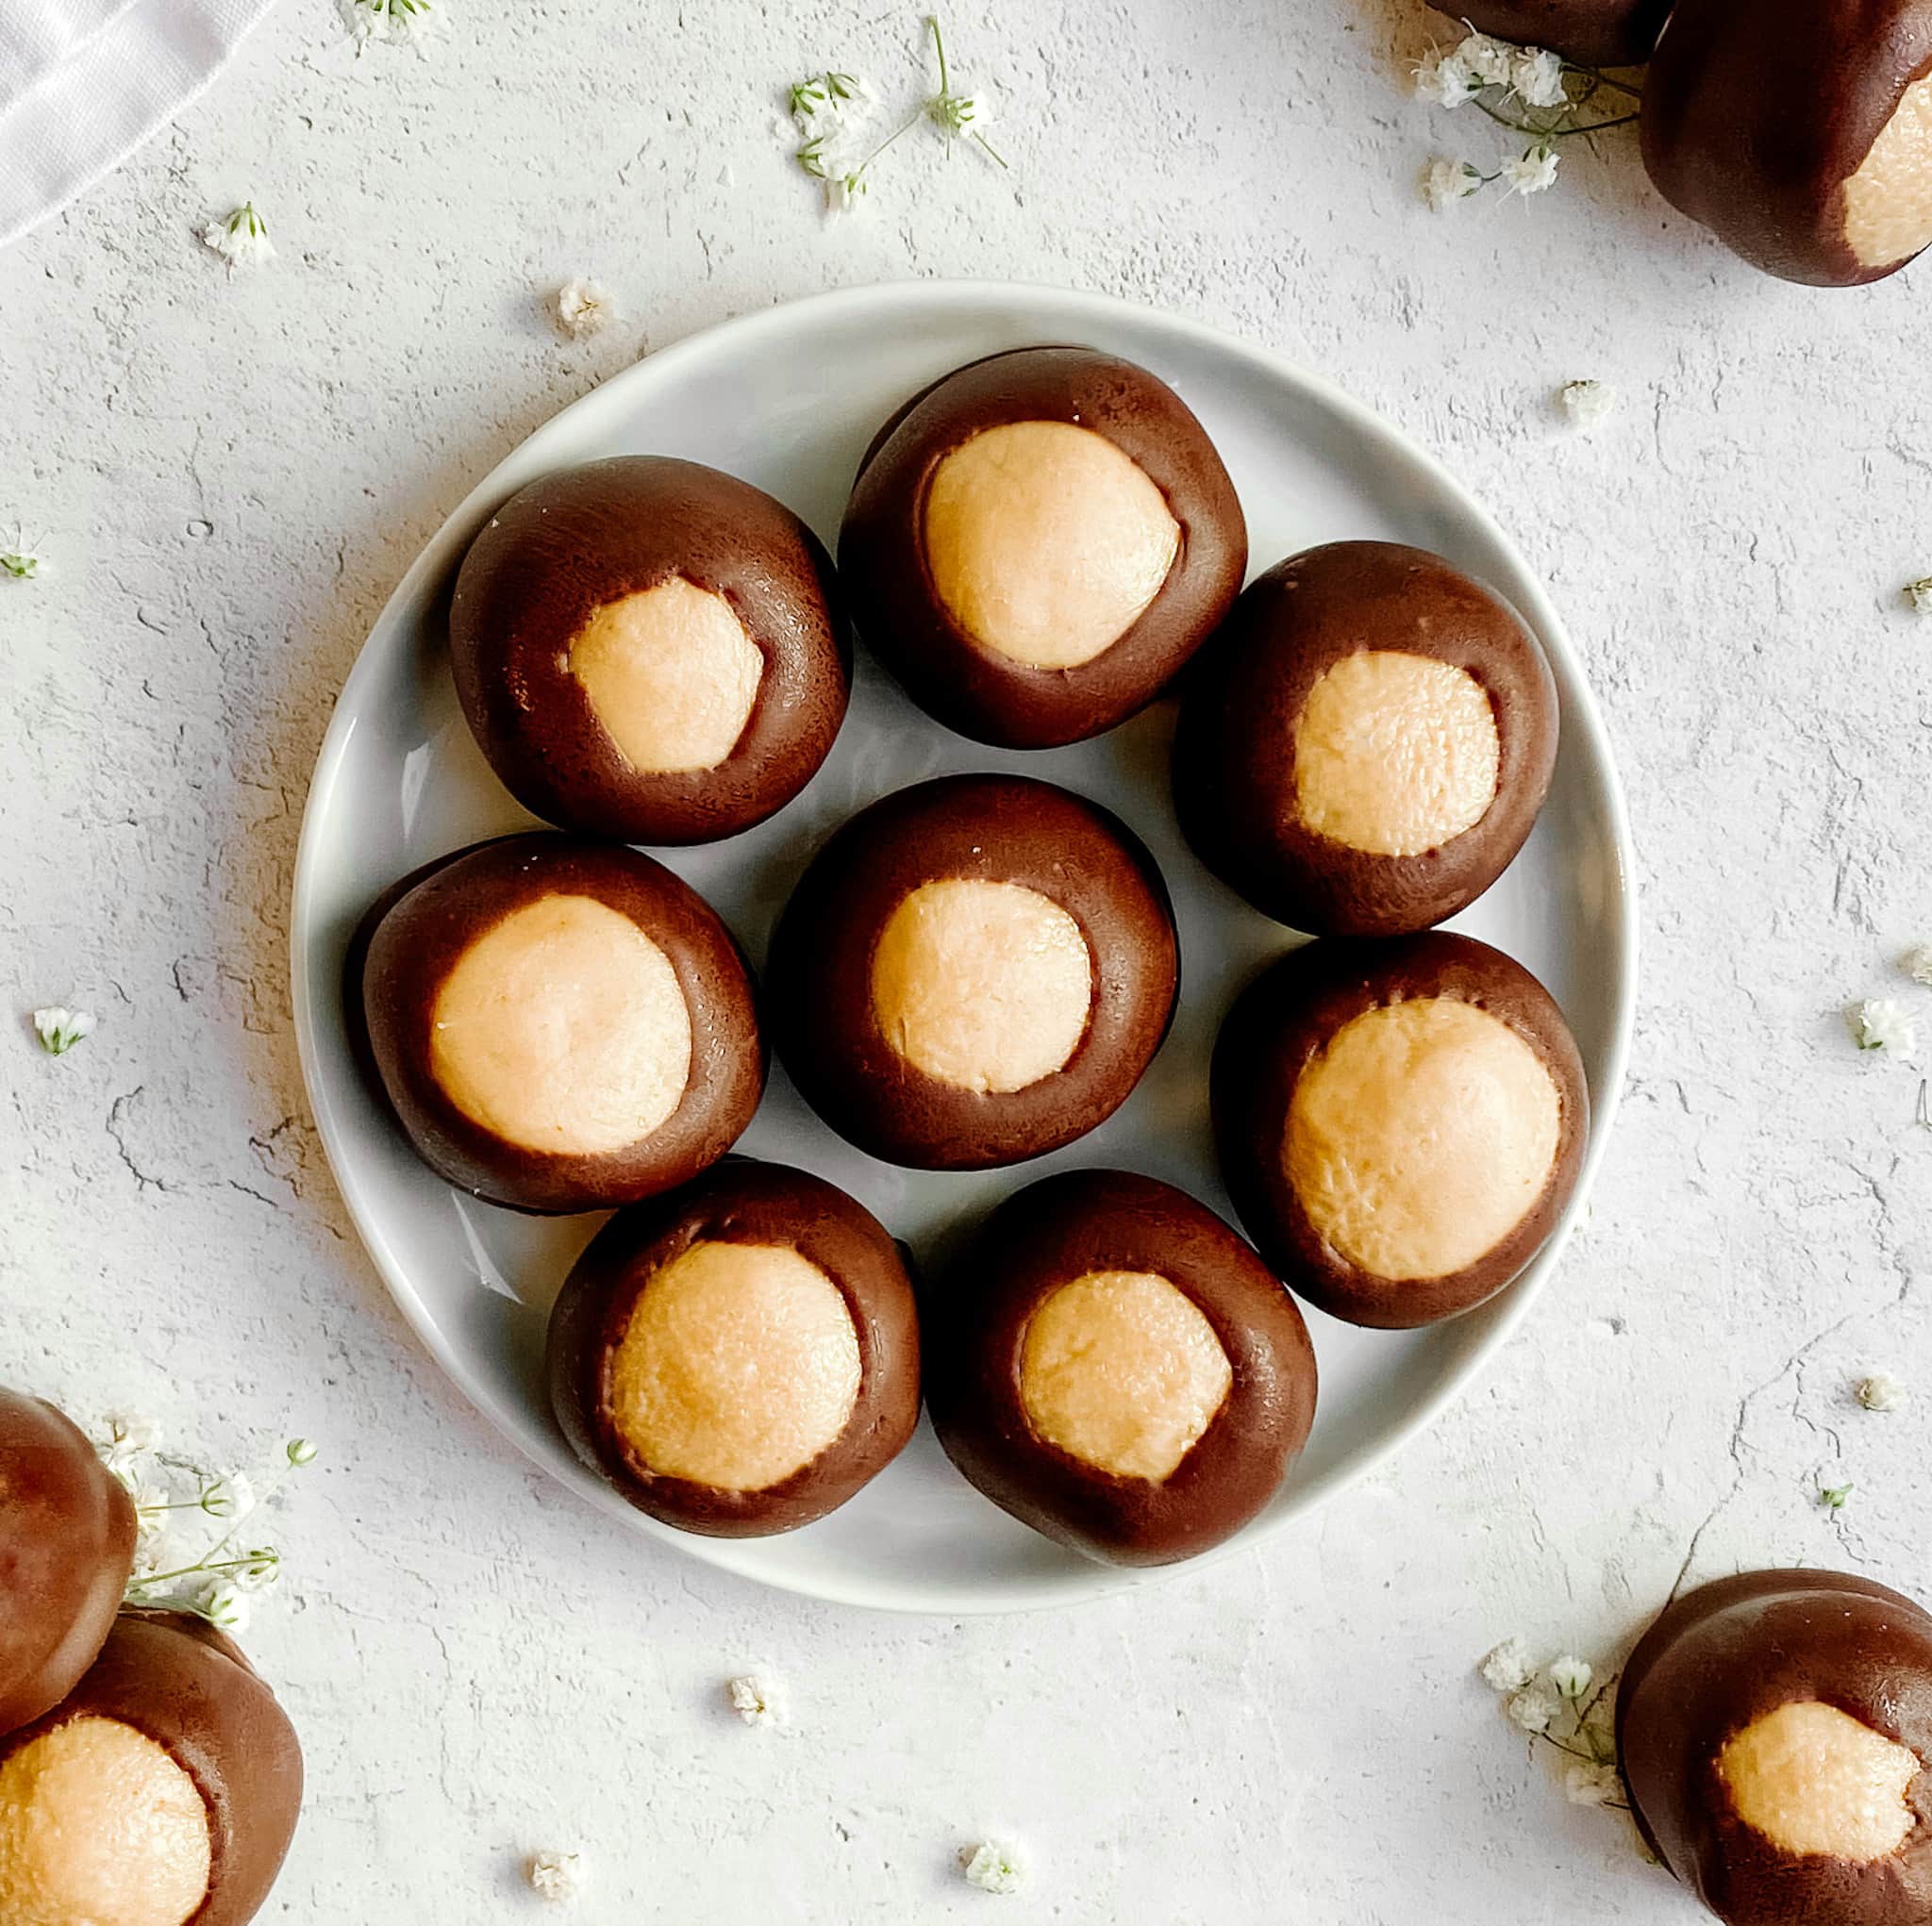 A circle of buckeyes on a small plate. Peanut but pokes through the center of the chocolate.